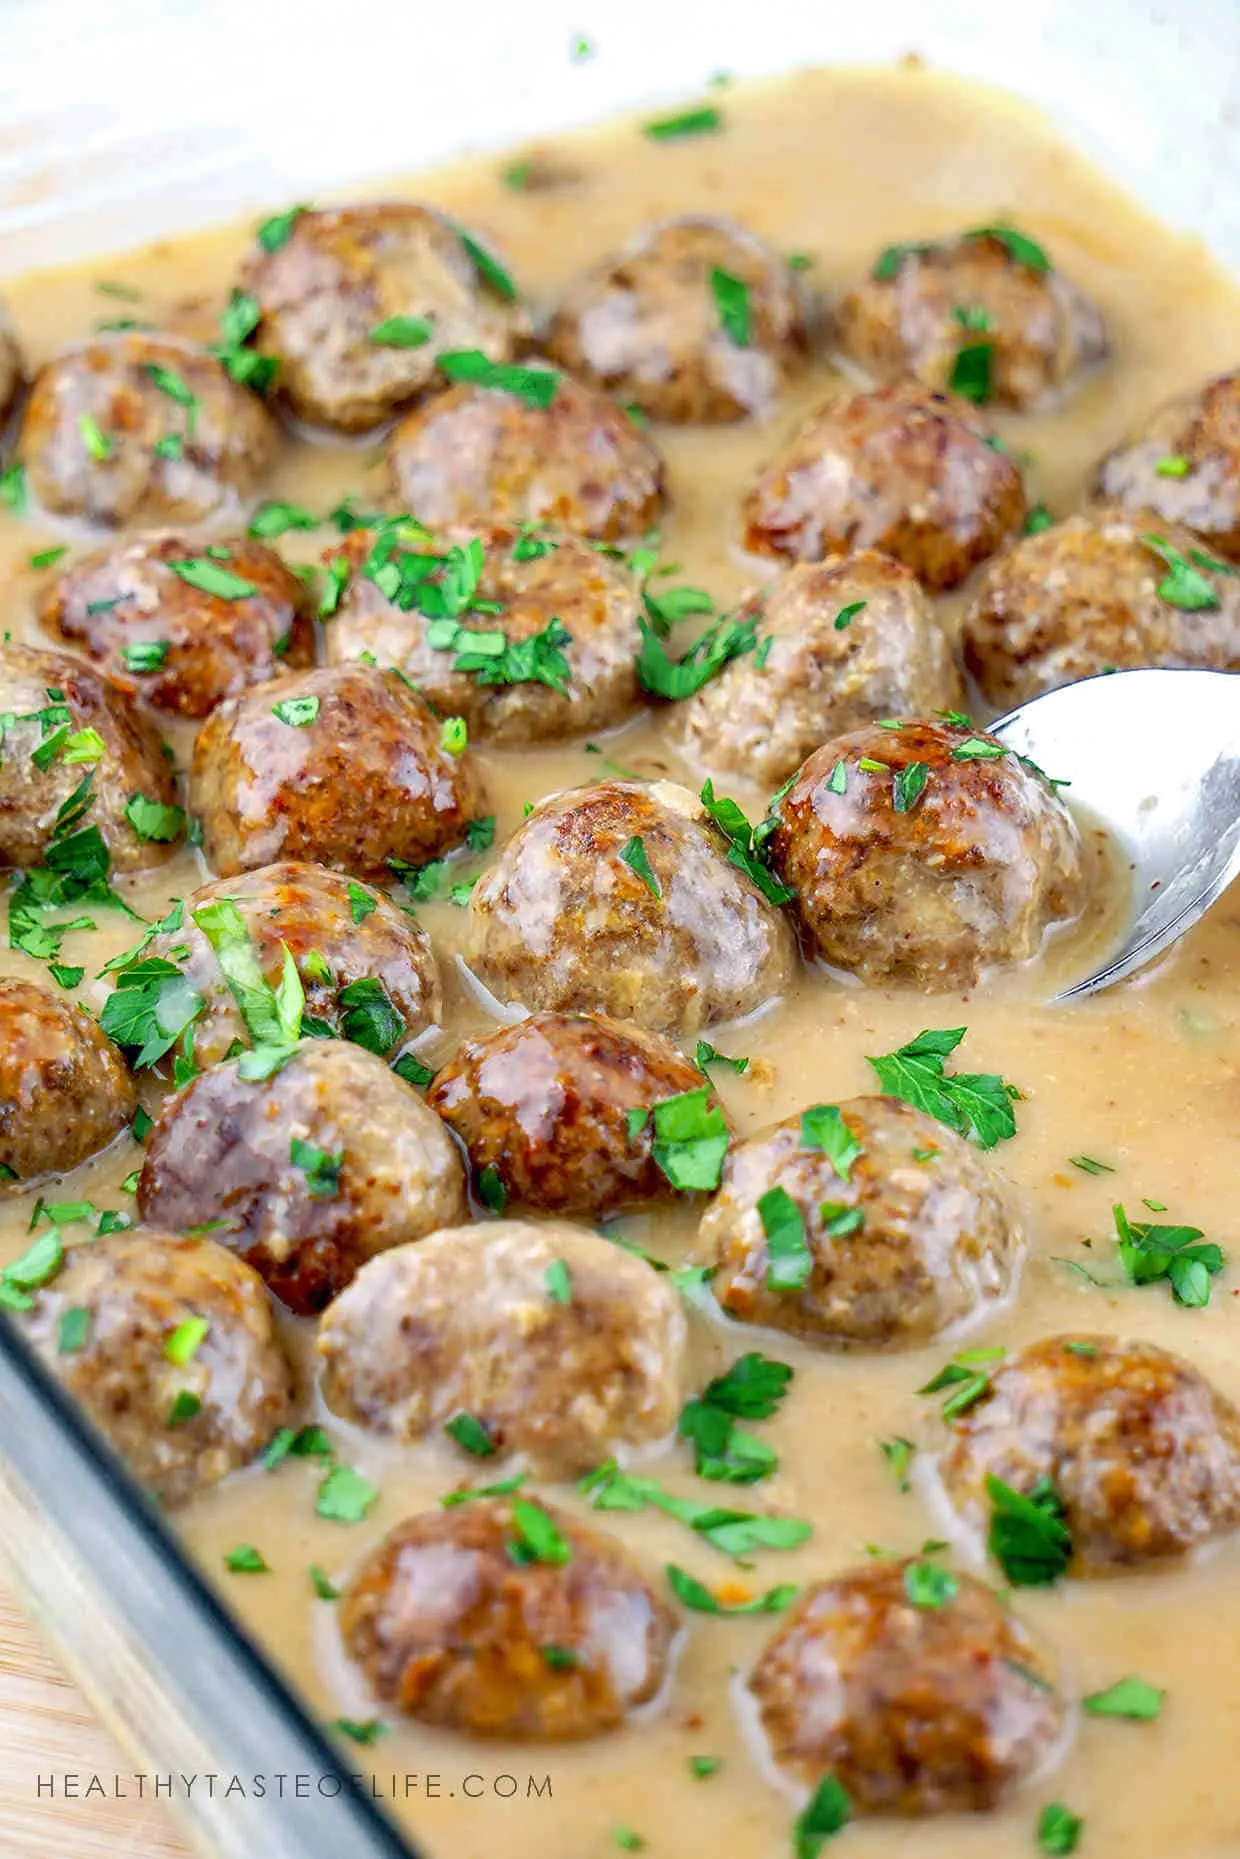 Healthy Homemade Gluten Free Swedish Meatballs With Beef, Turkey  Baked In the Oven + Dairy Free Sauce Recipe